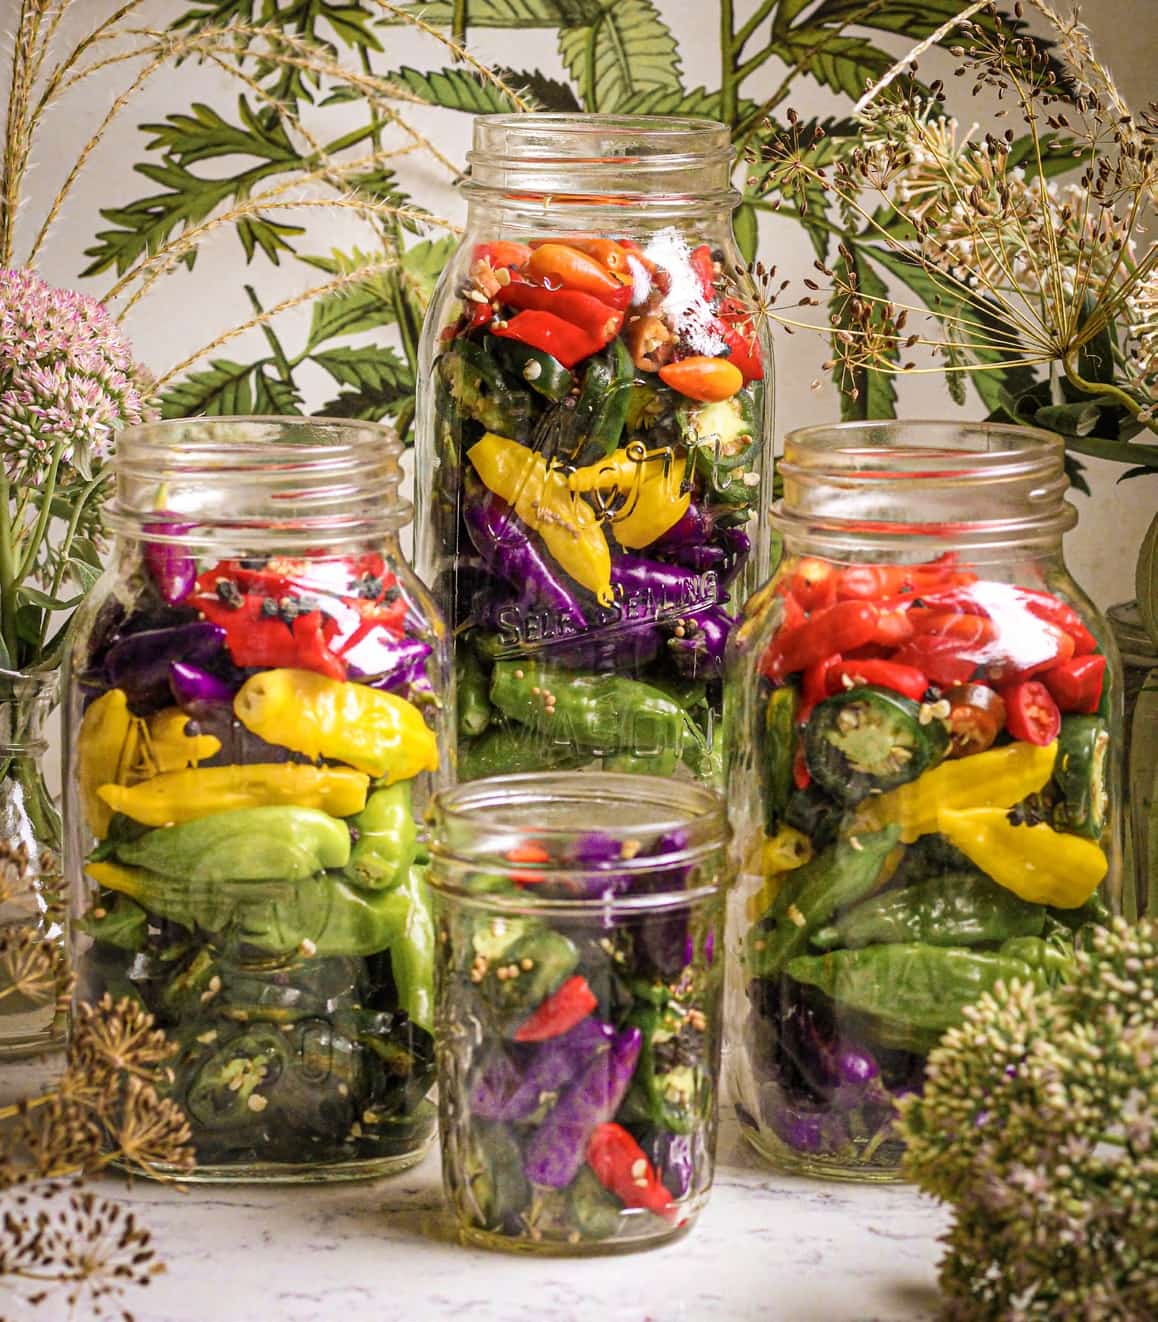 REFRIGERATOR QUICK PICKLES from MUST LOVE HERBS - Lauren May